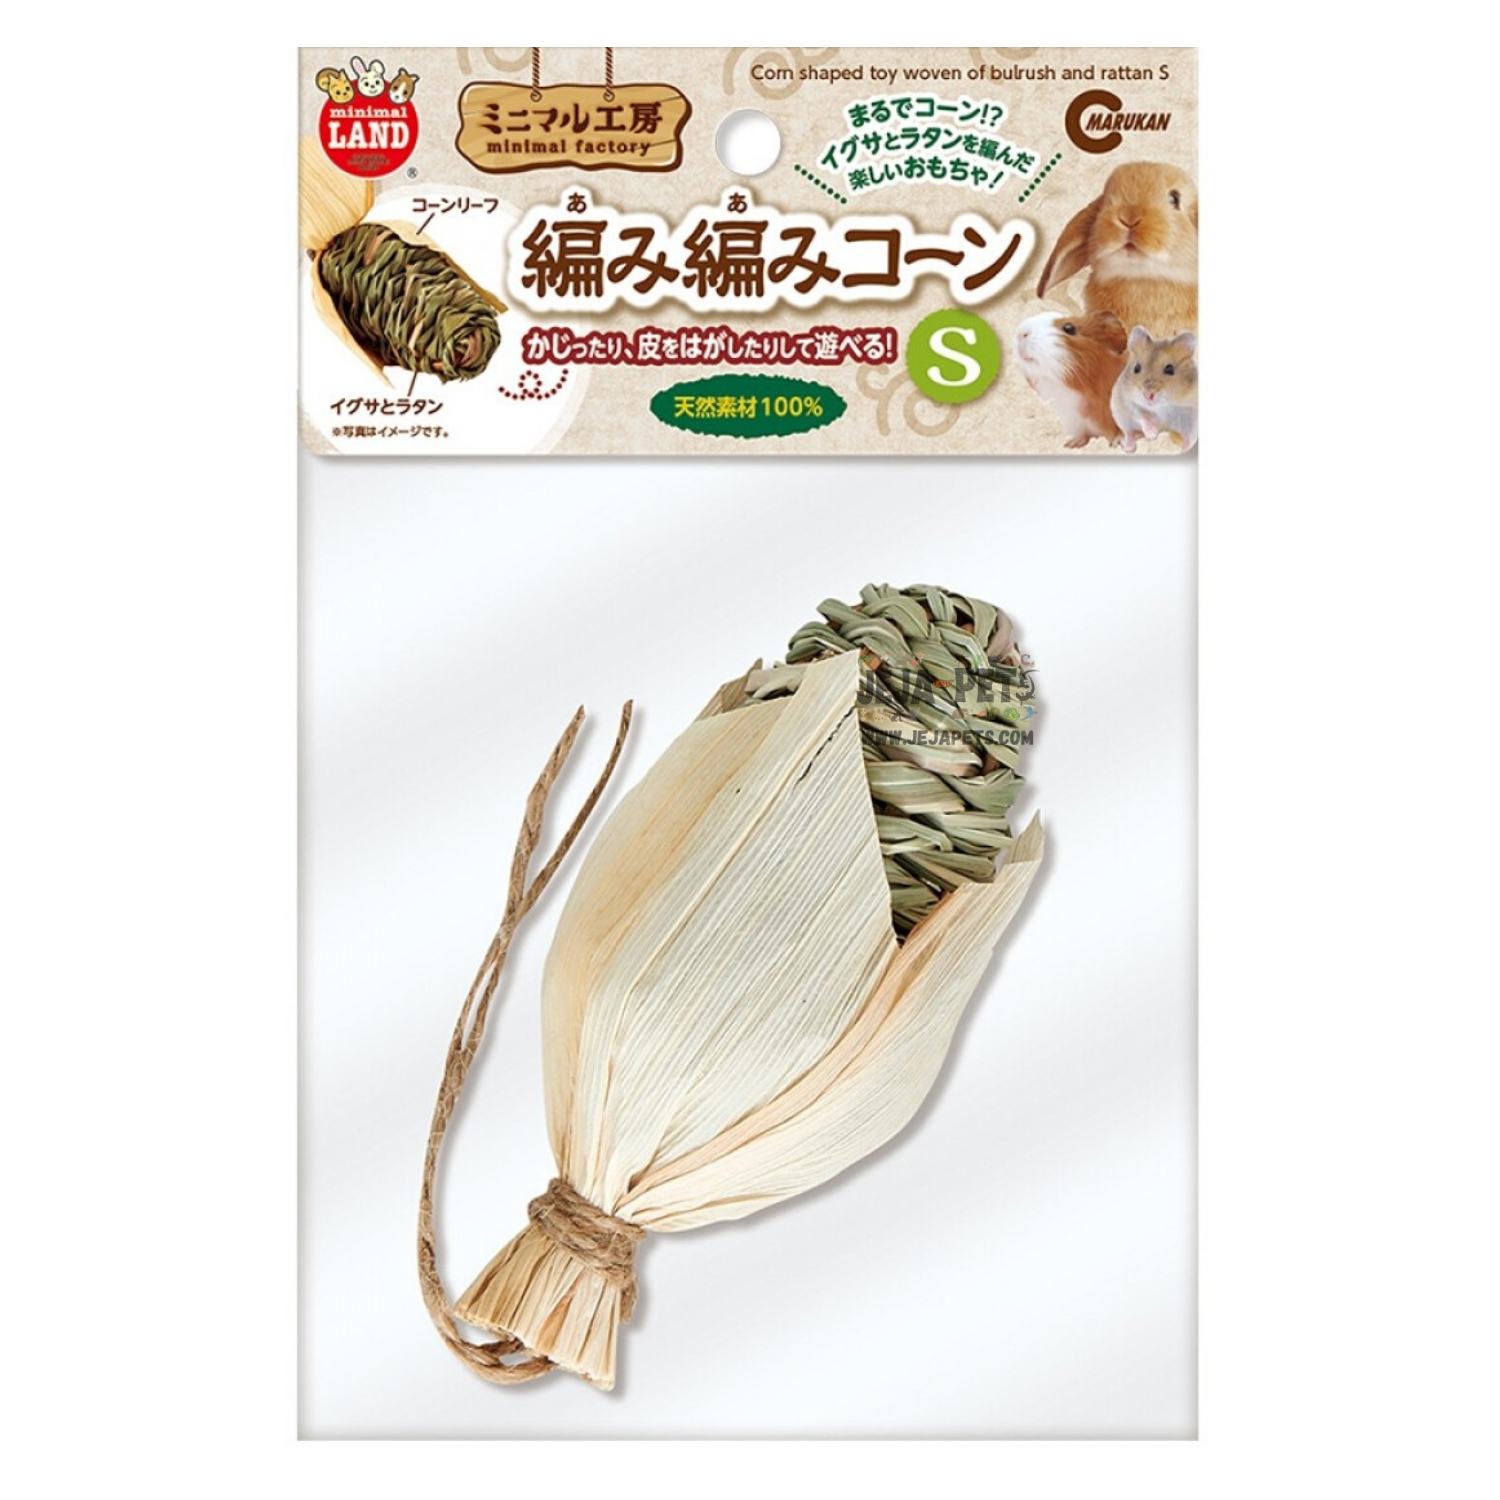 Marukan Corn Shaped Toy Woven of Bulrush and Rattan - S